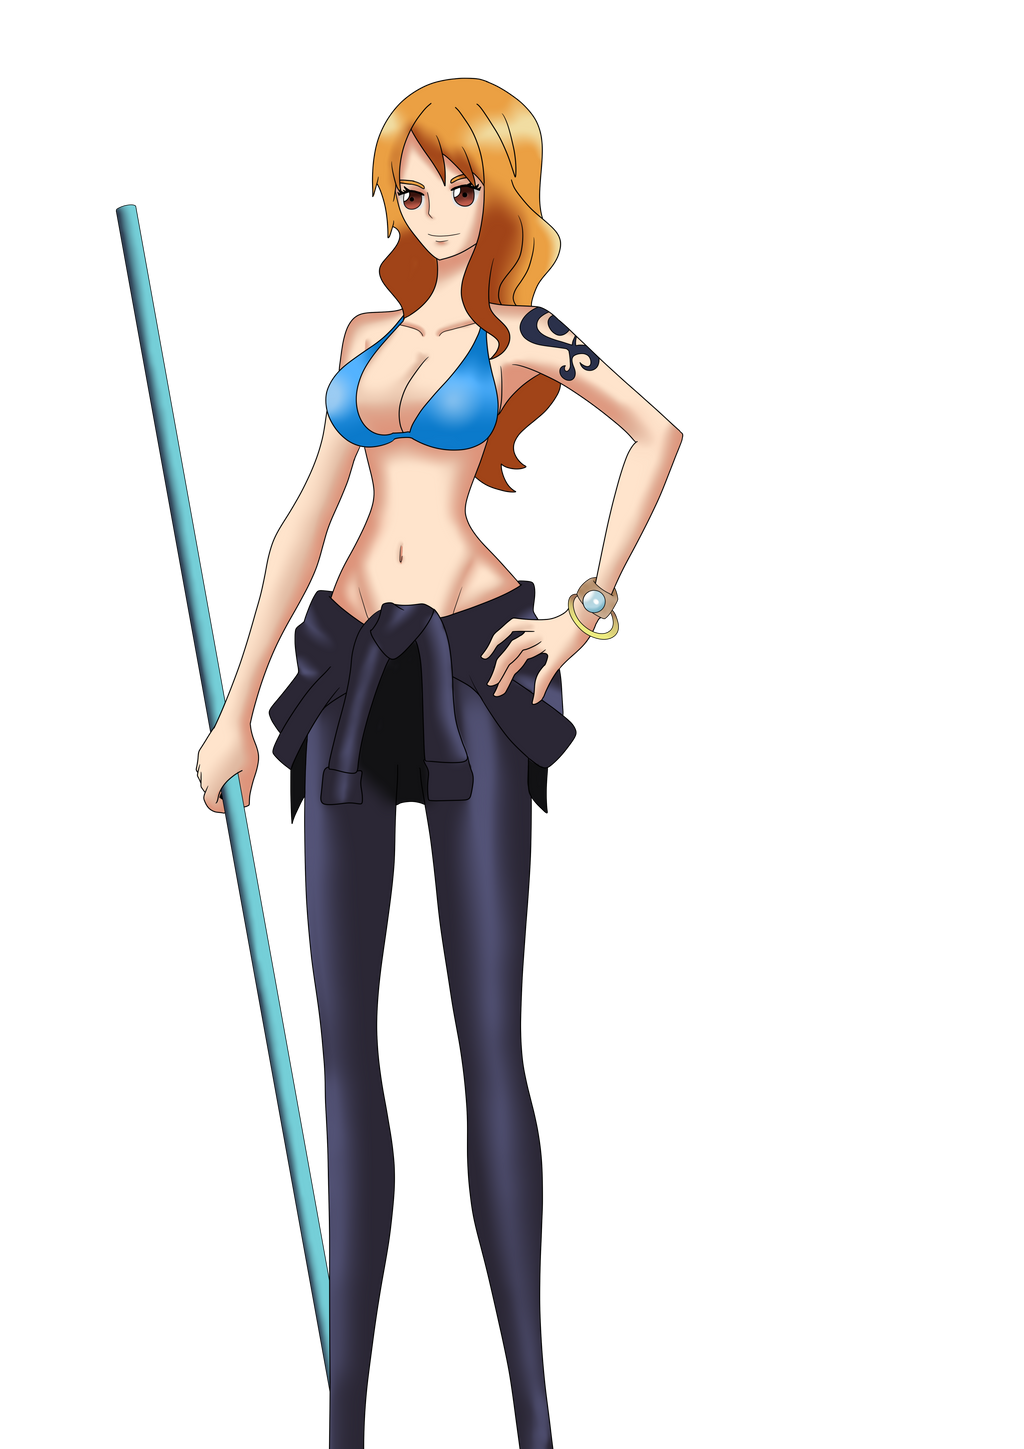 One Piece Film Gold png images